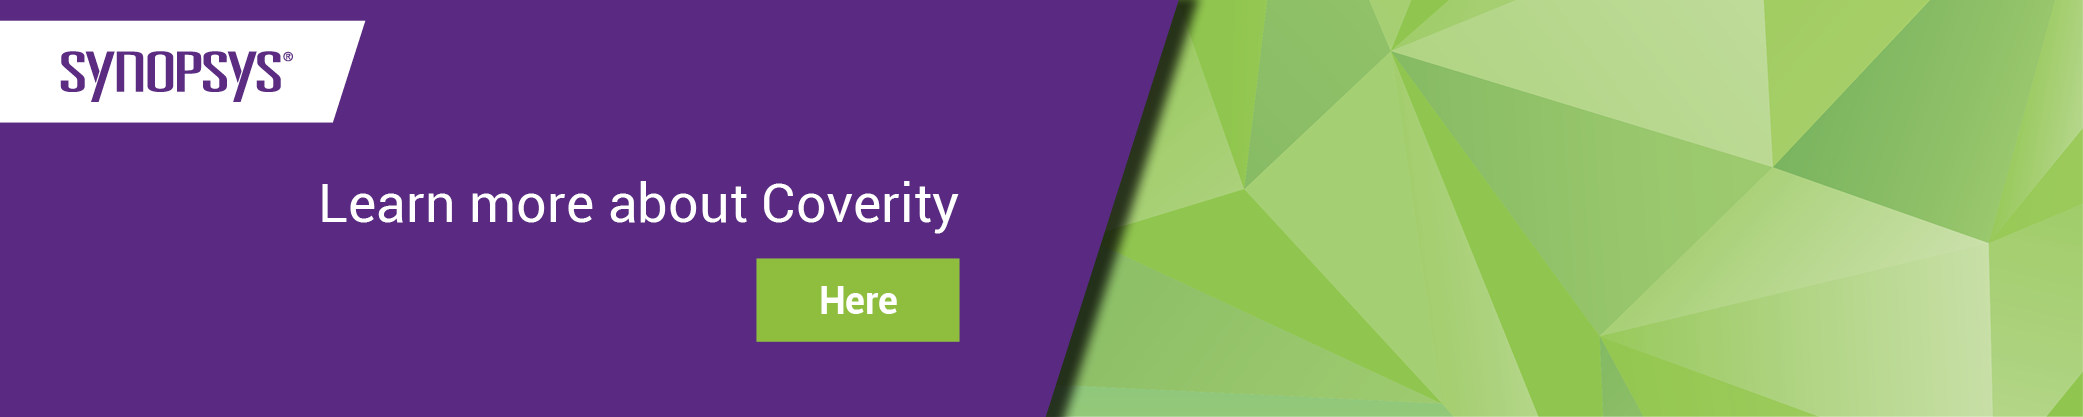 Learn about Coverity | Synopsys